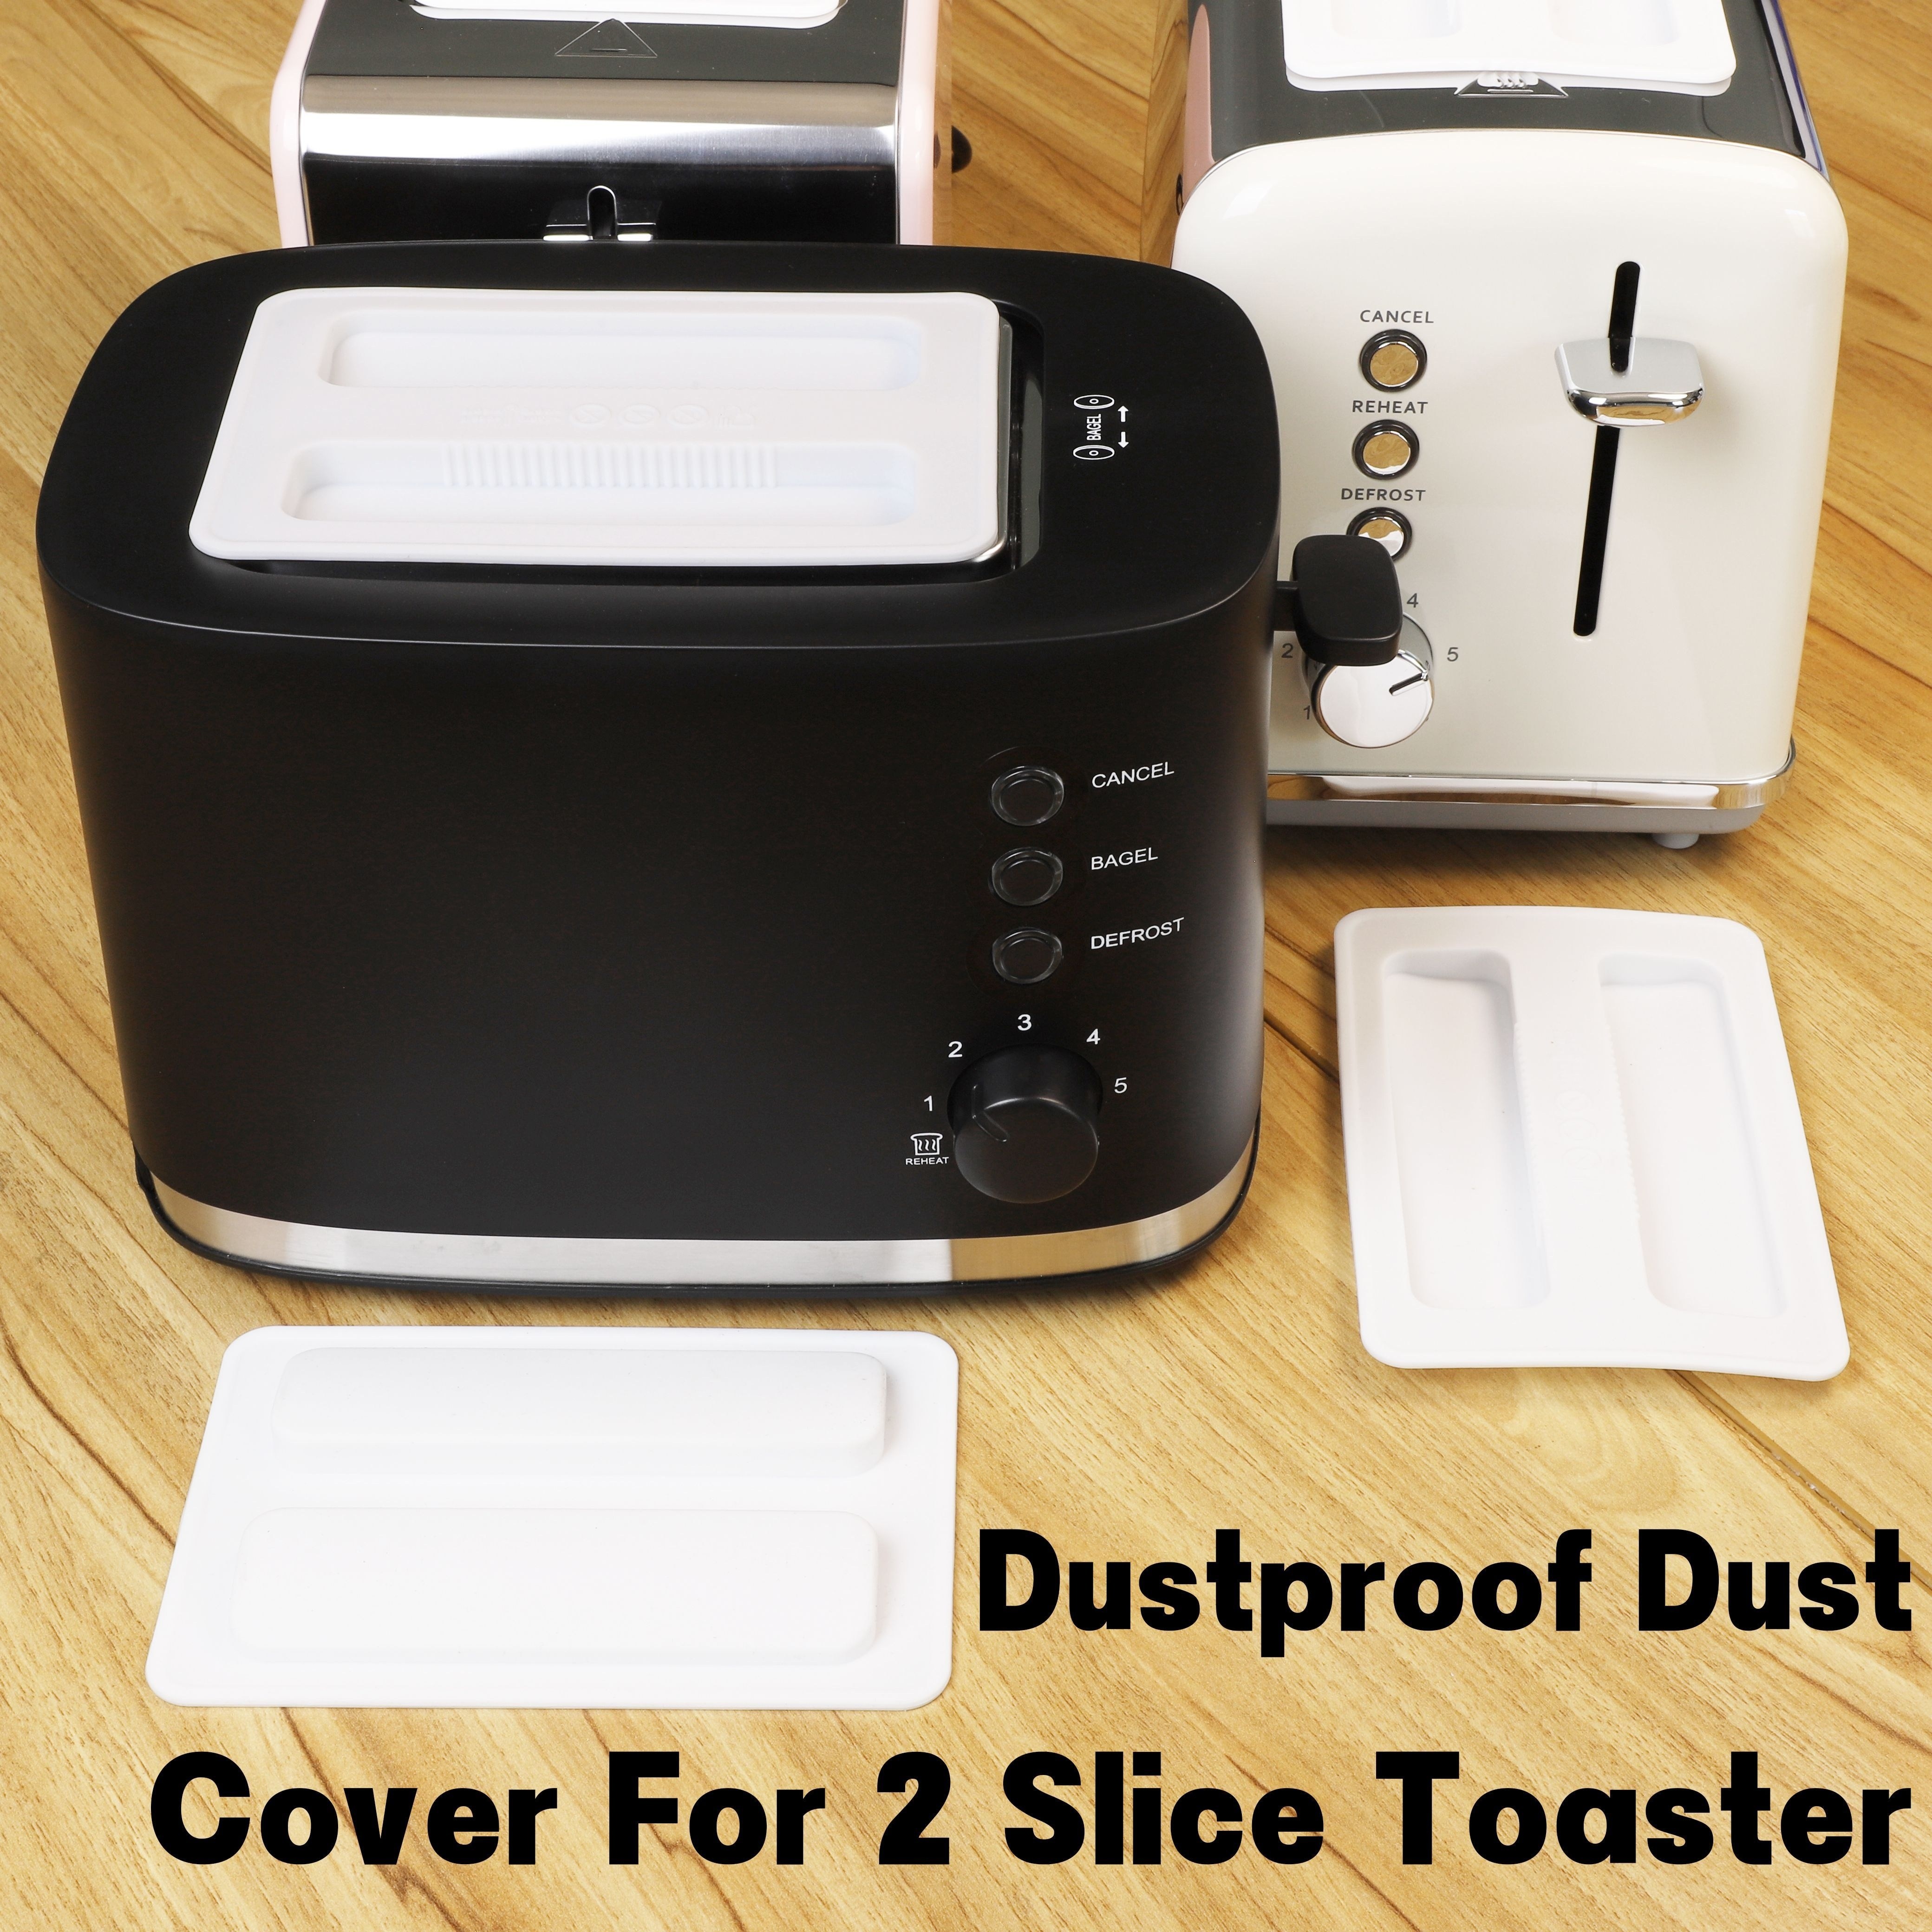 1pc Dustproof Cover For Toaster ,Silicone Toaster Lid,BPA Free,Food Safety  ,Protecting Your Toaster From Dust, Dirt, Spills, Splash, And Smudges,Toast